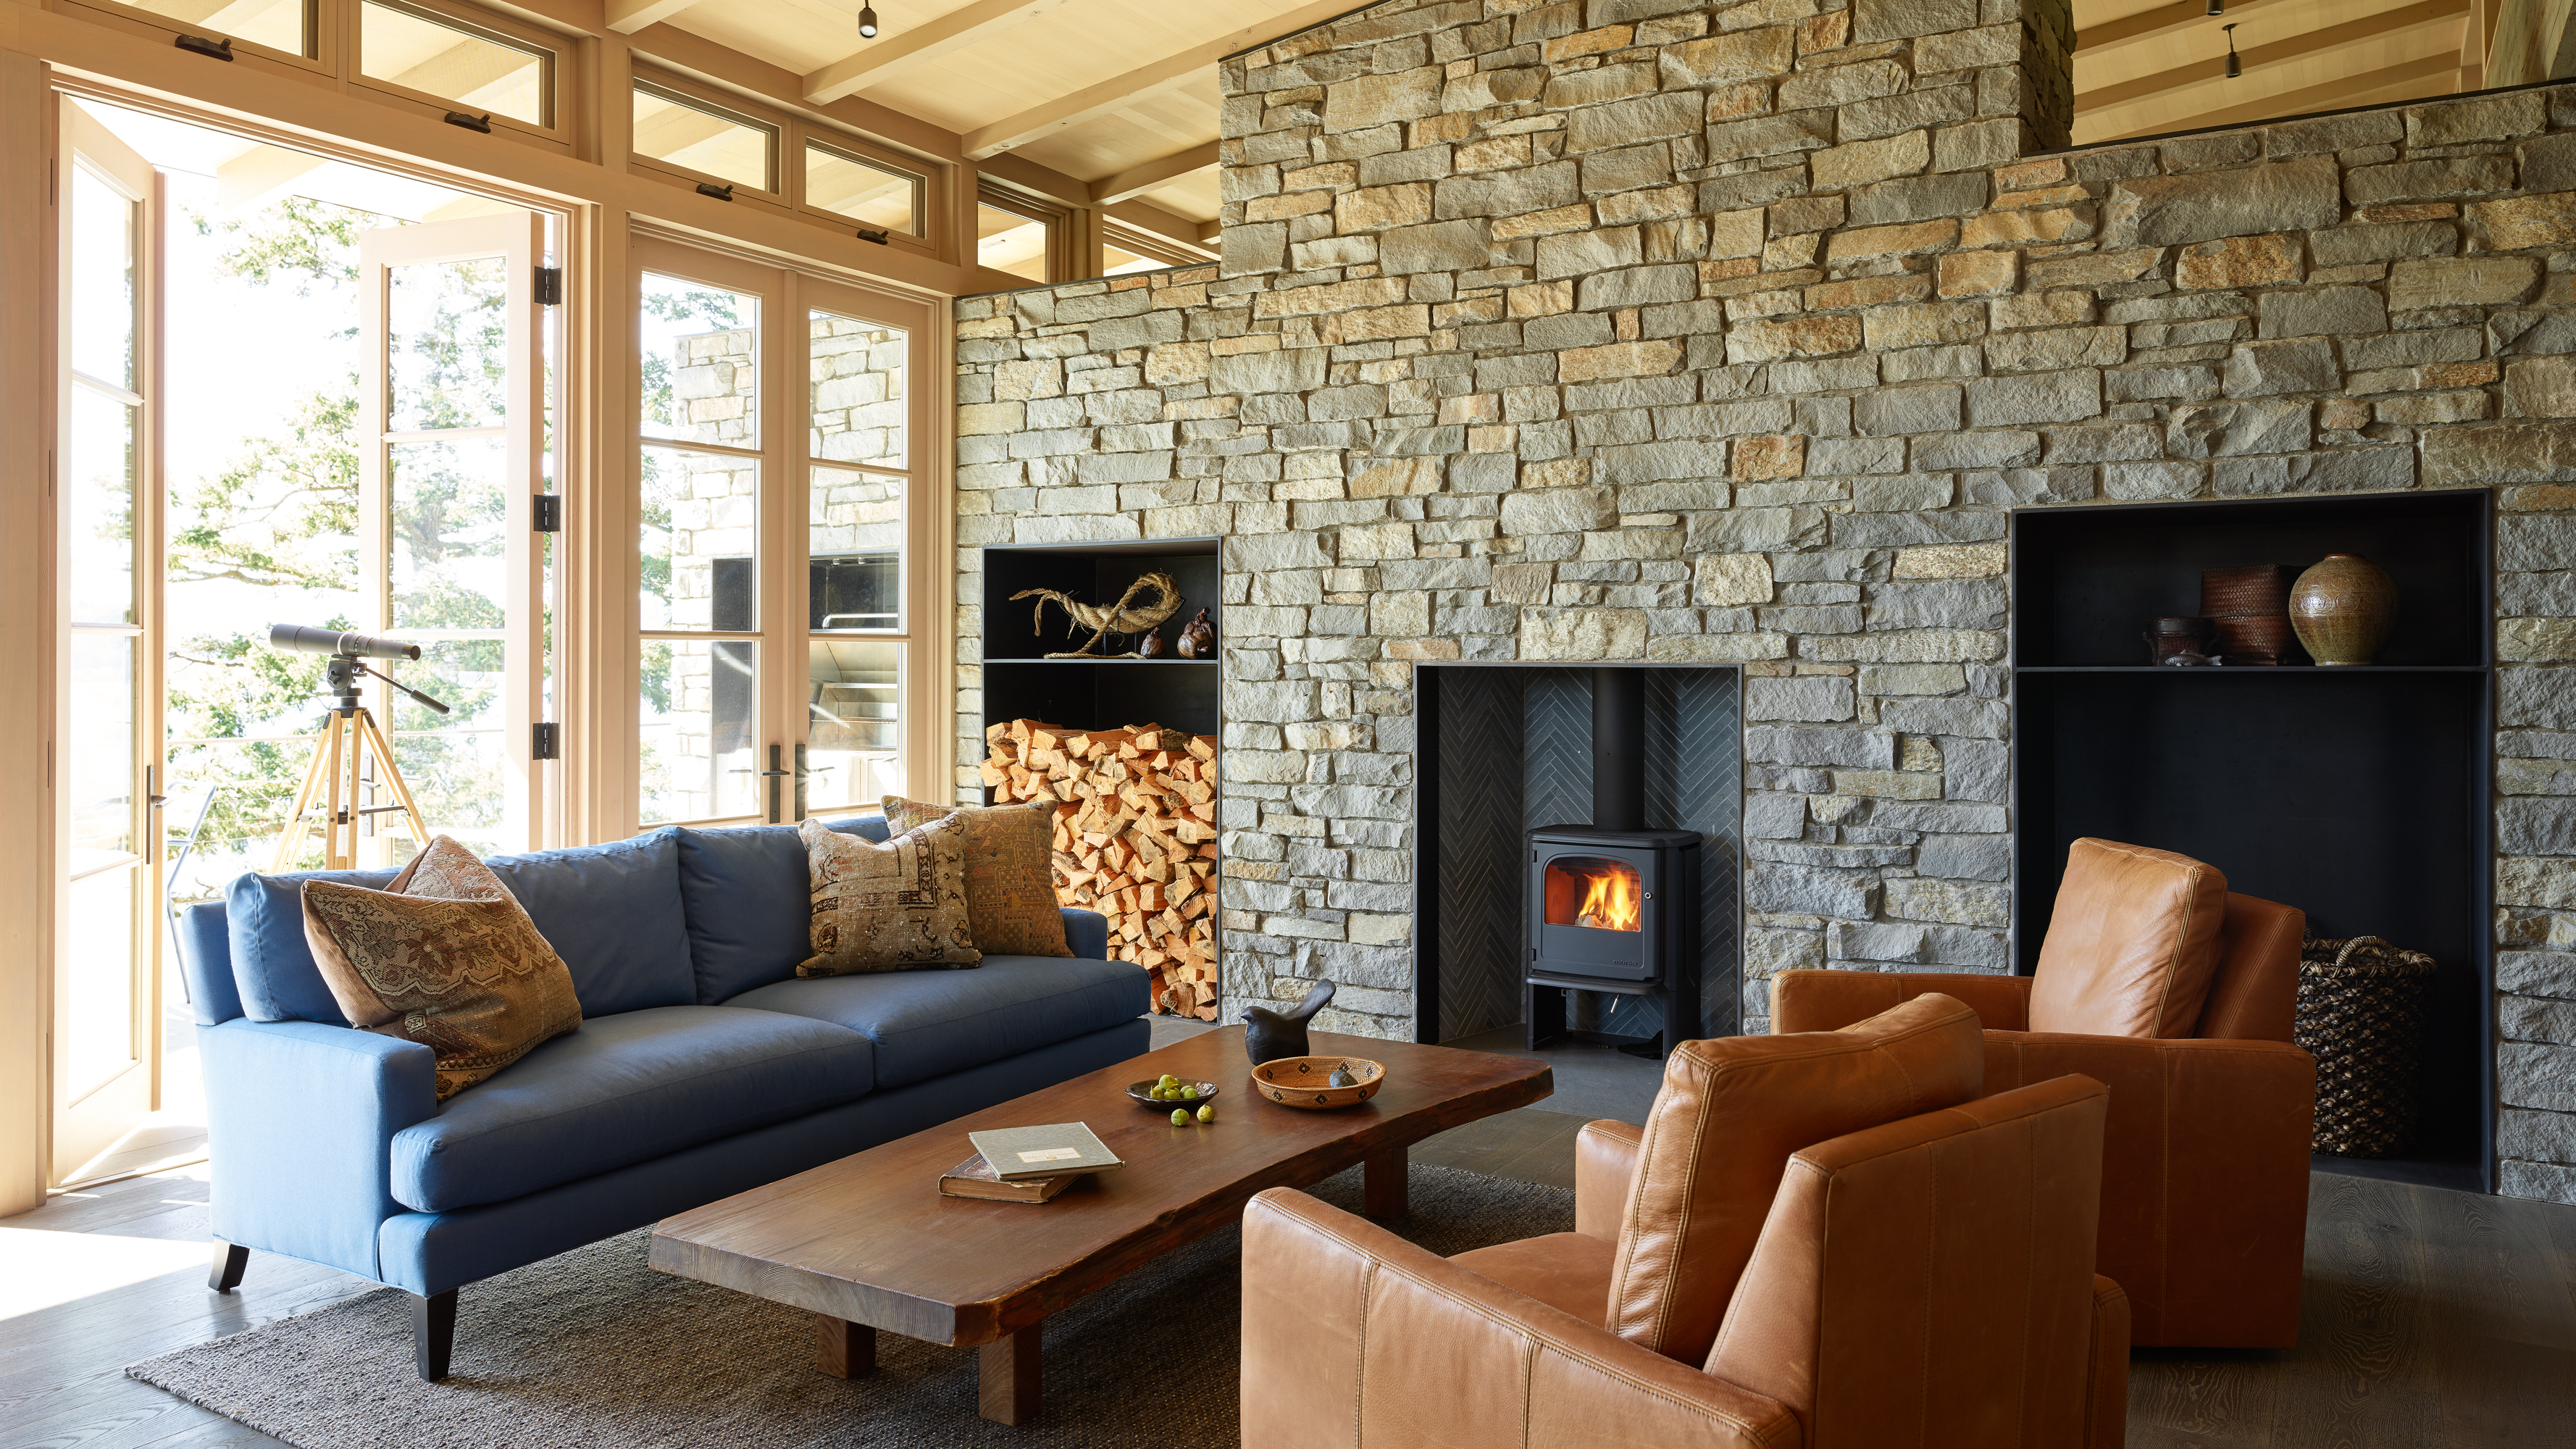 The public area features the wood stove, which is set within a stone wall that mimics the exterior cladding. Stone wraps other walls within the home, helping draw a connection to the natural setting.